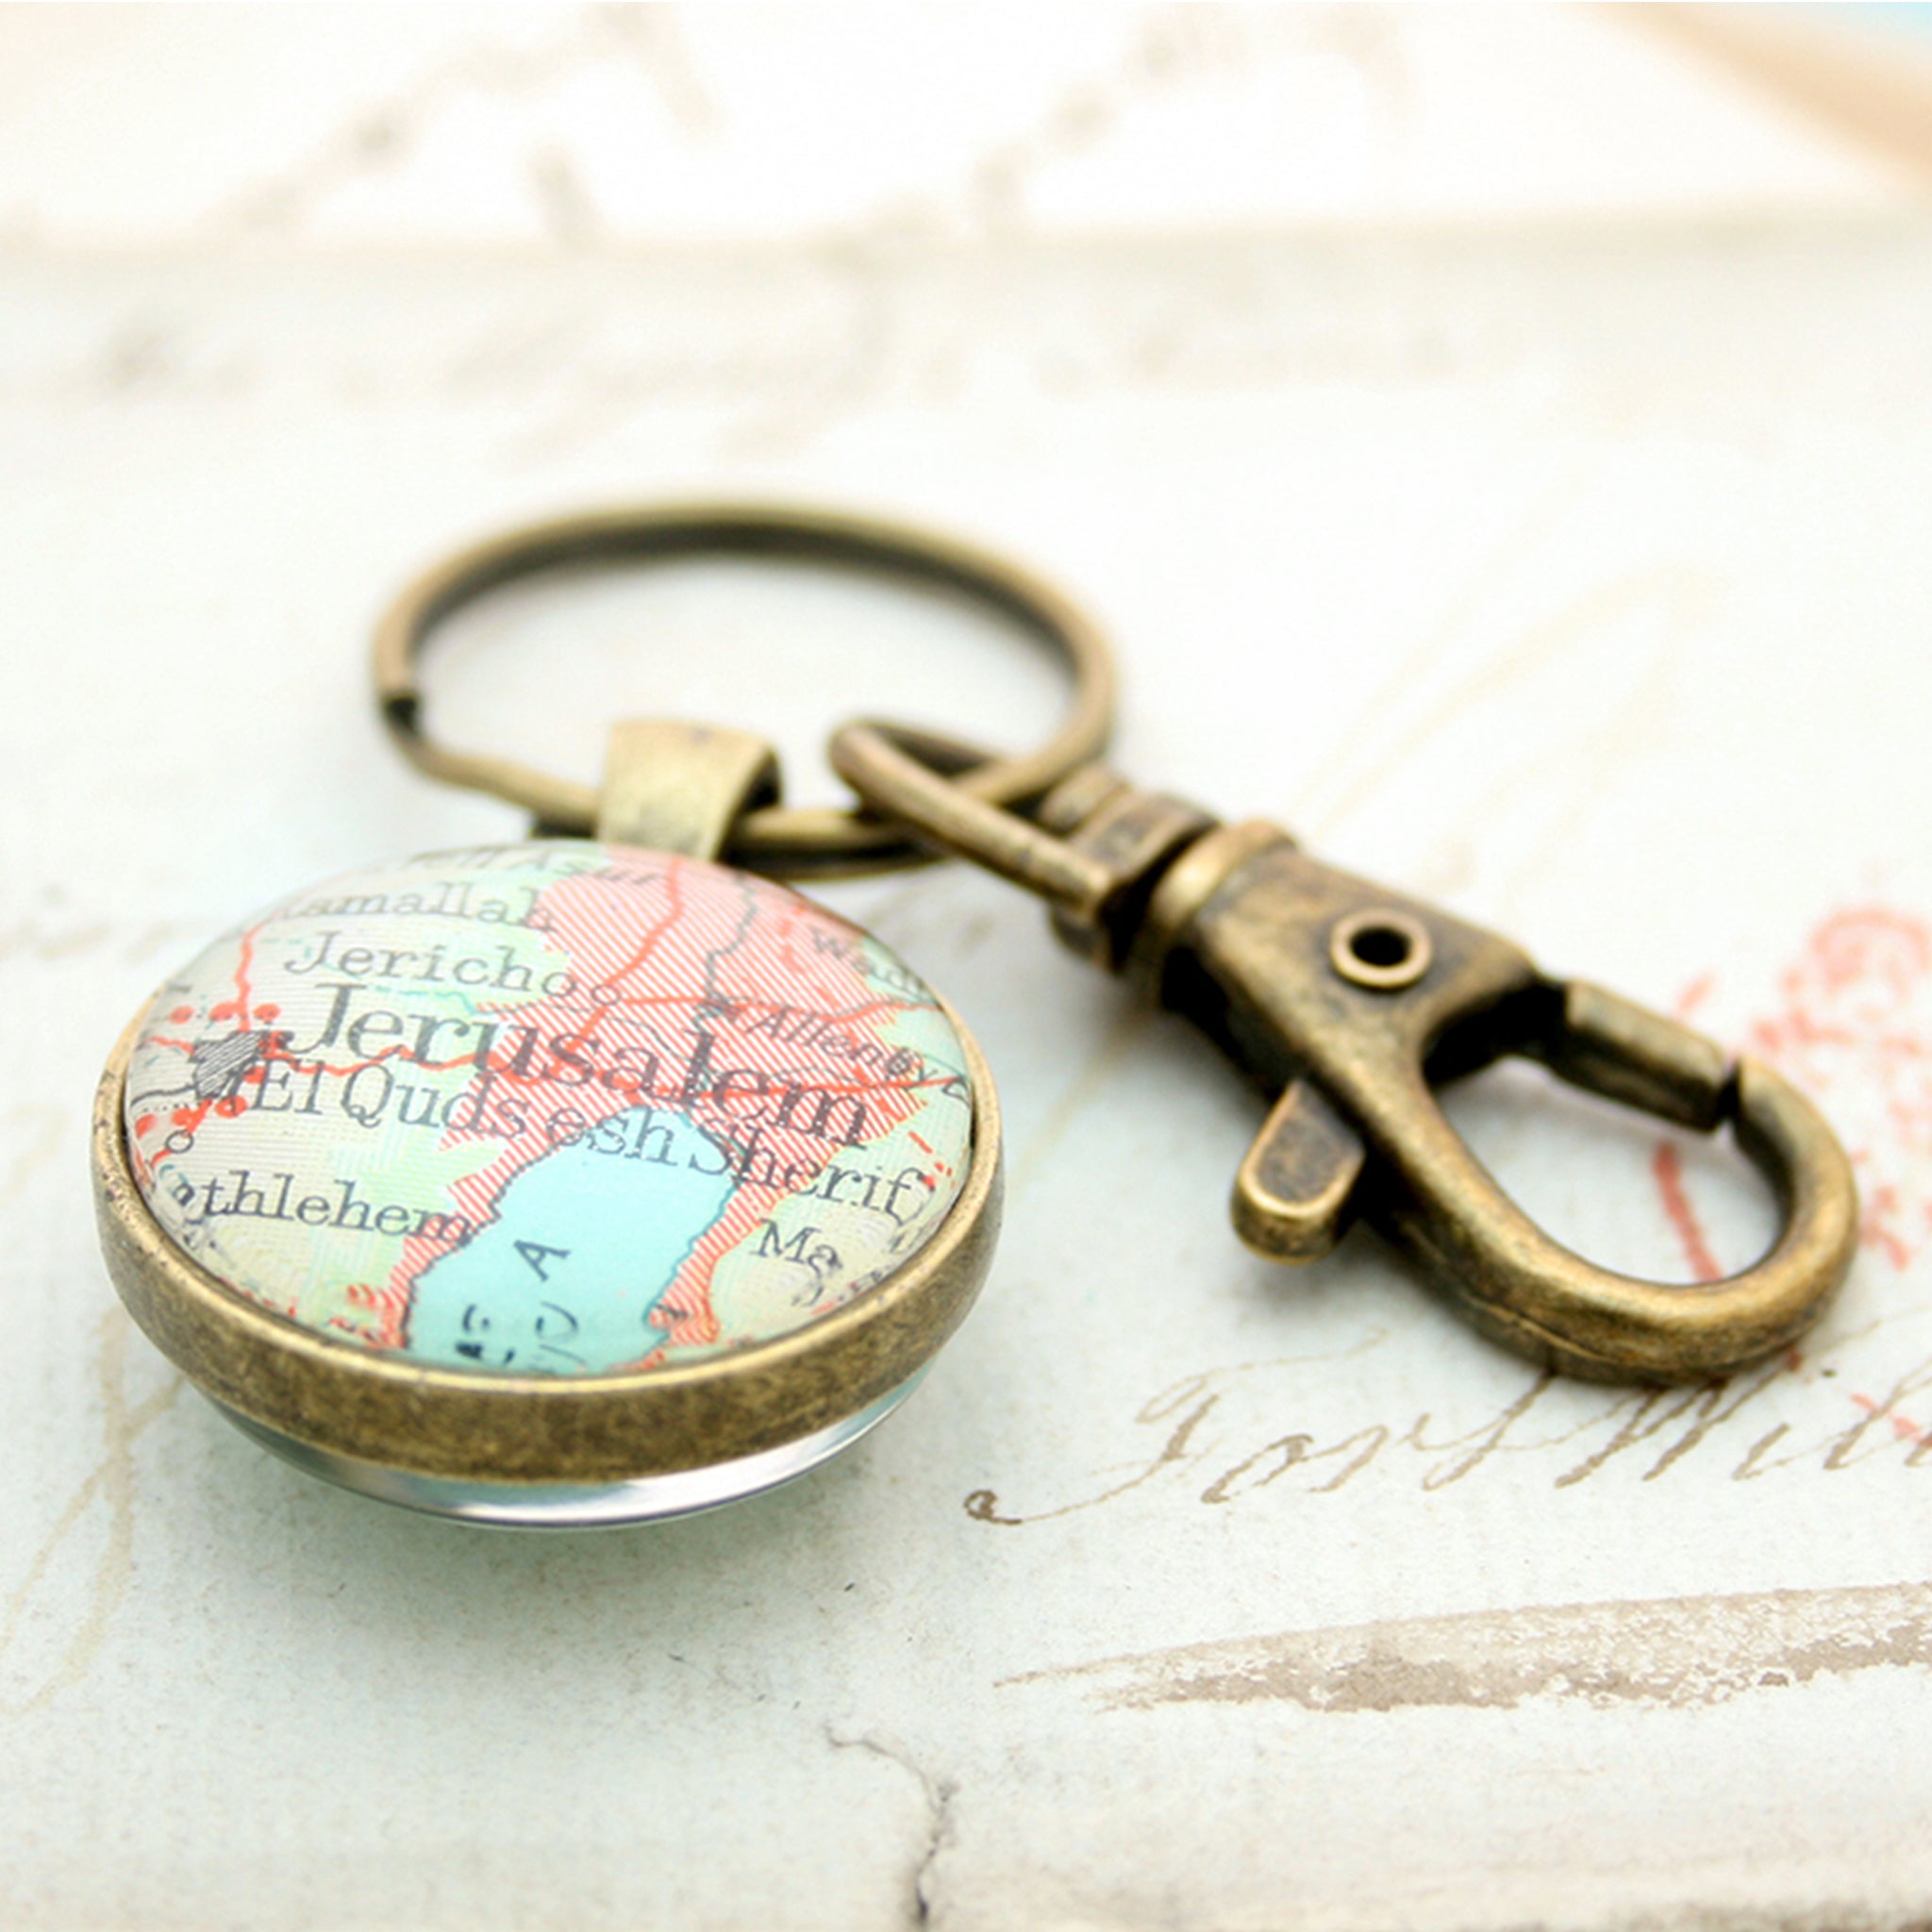 Personalised Keyring in bronze color featuring map of Jerusalem